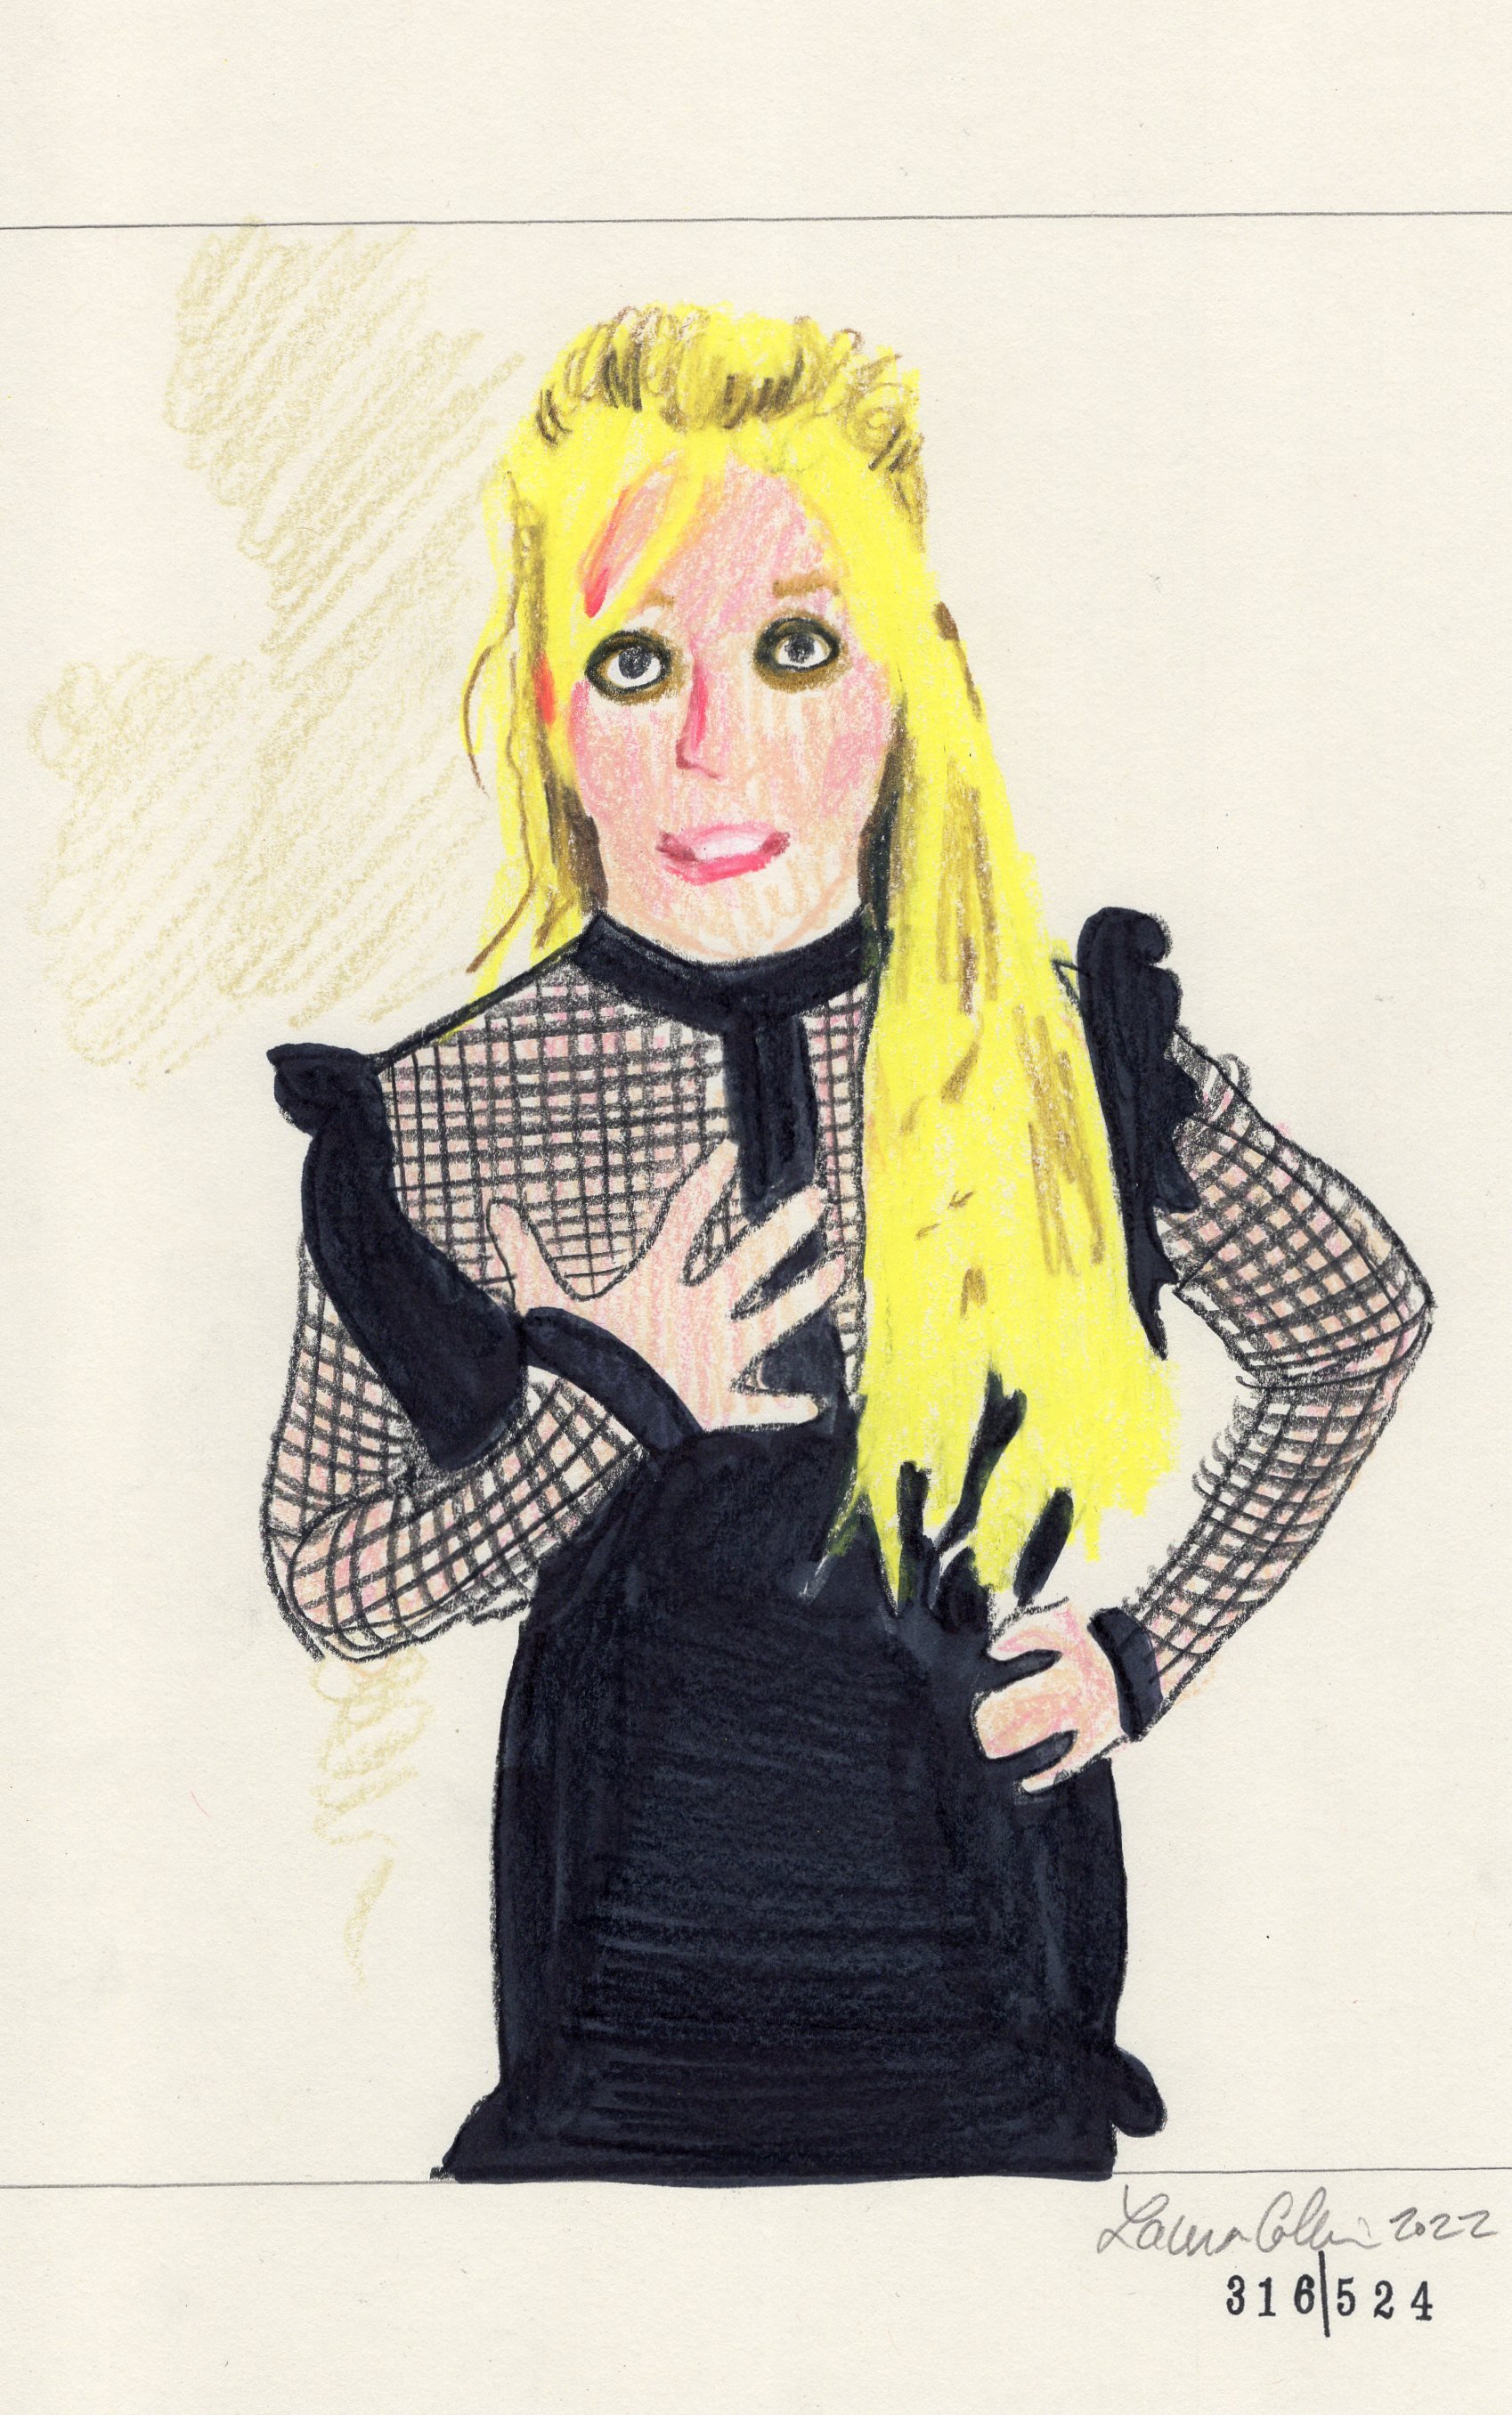 Laura Collins Britney Spears Animation 6x9in mixed media 2022 no316.jpg